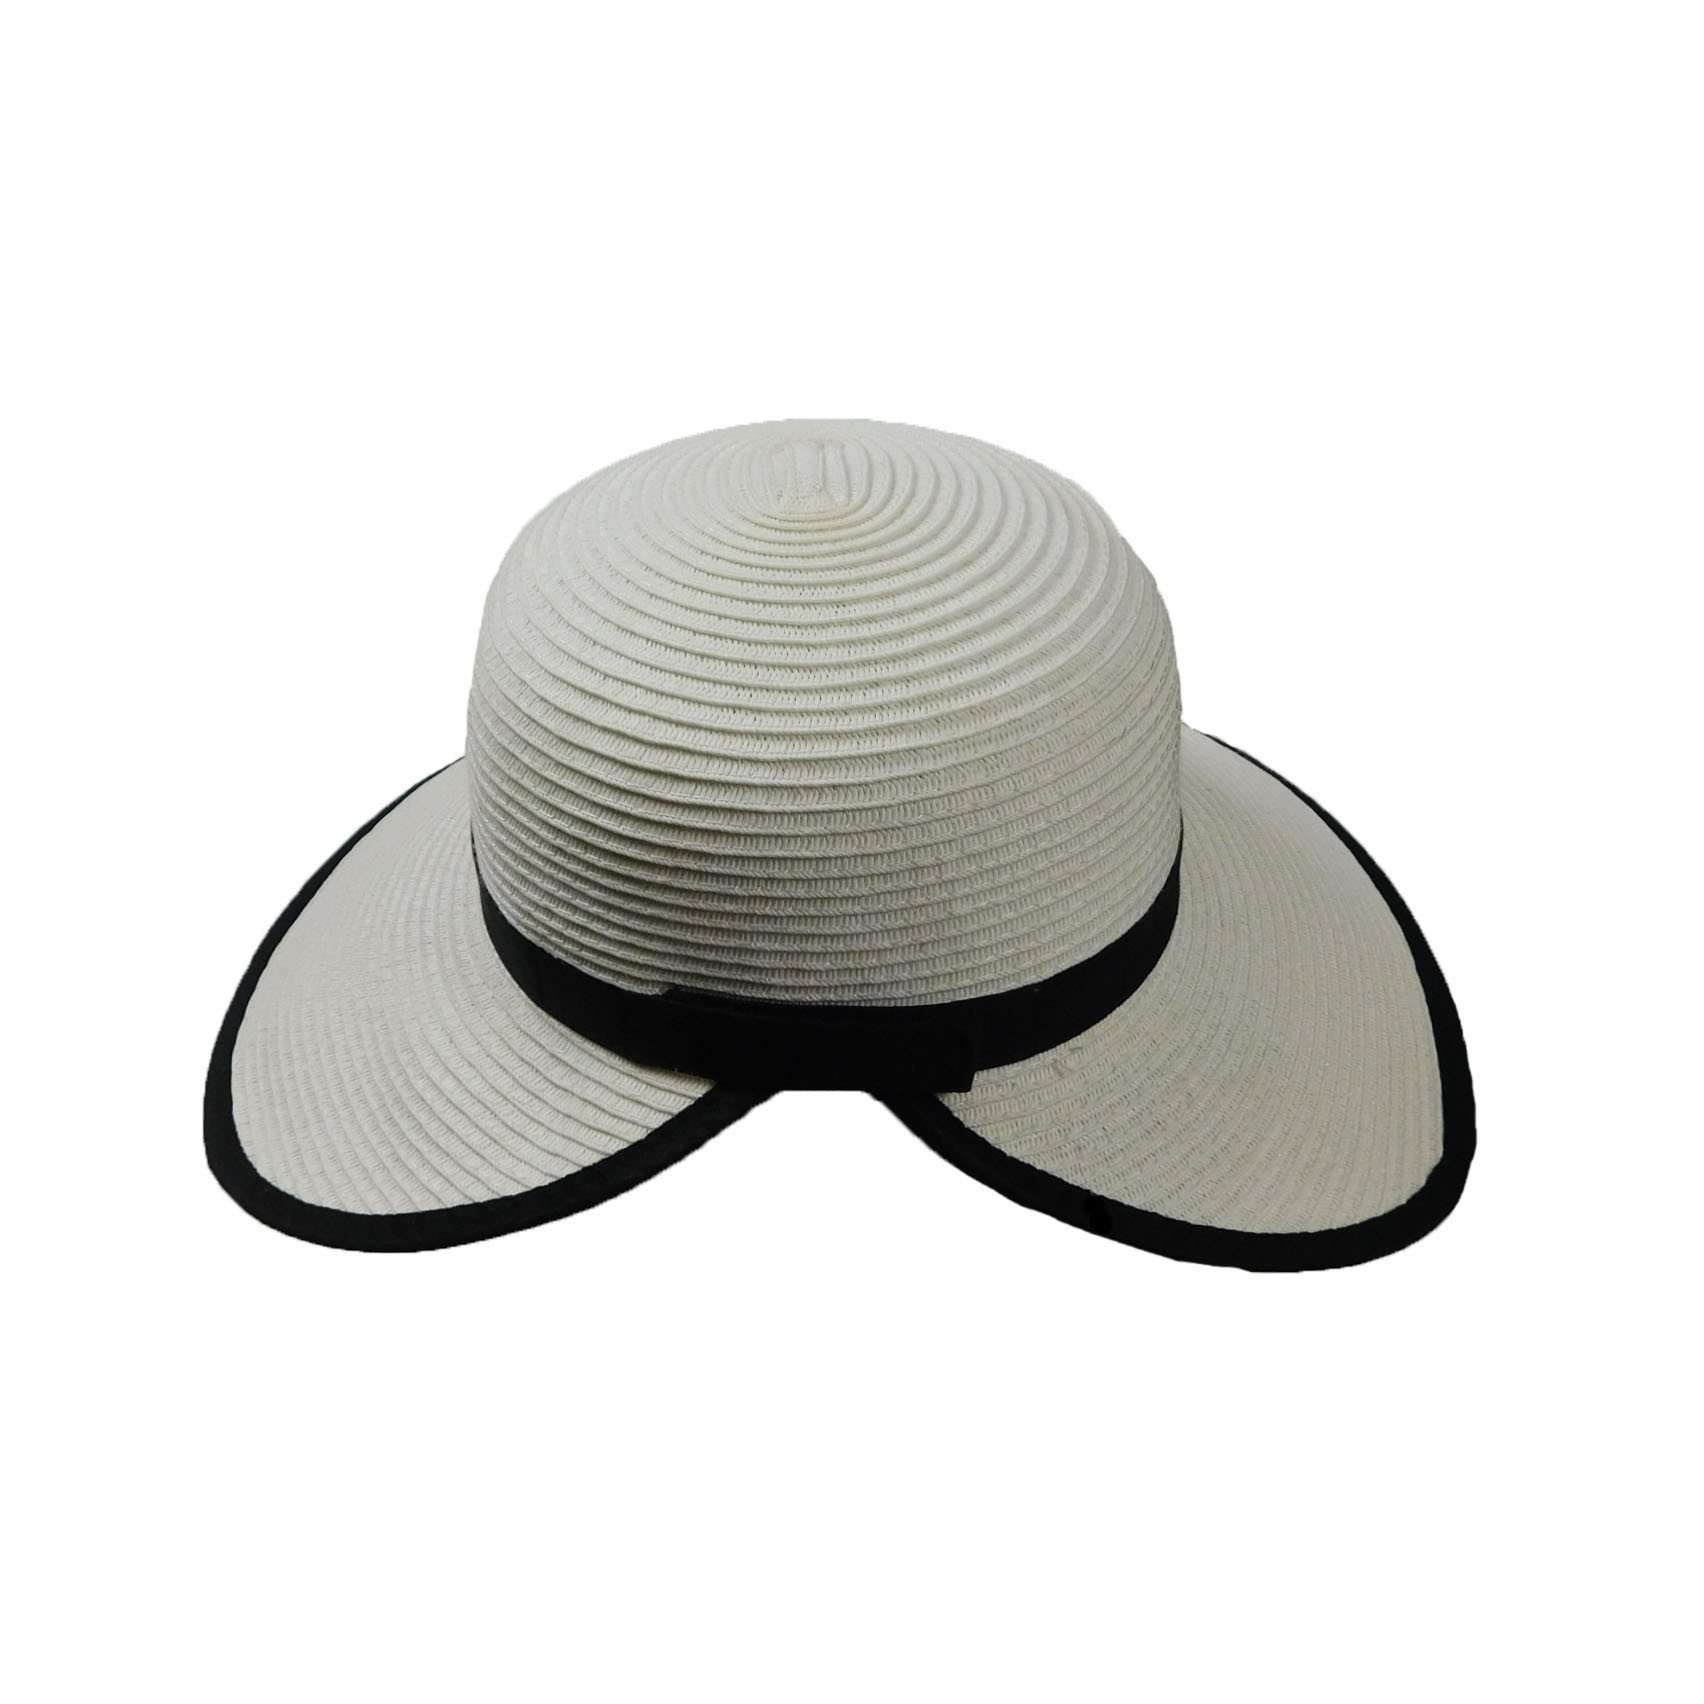 Facesaver Hat Facesaver Hat Boardwalk Style Hats WSPS566WB White and Black  